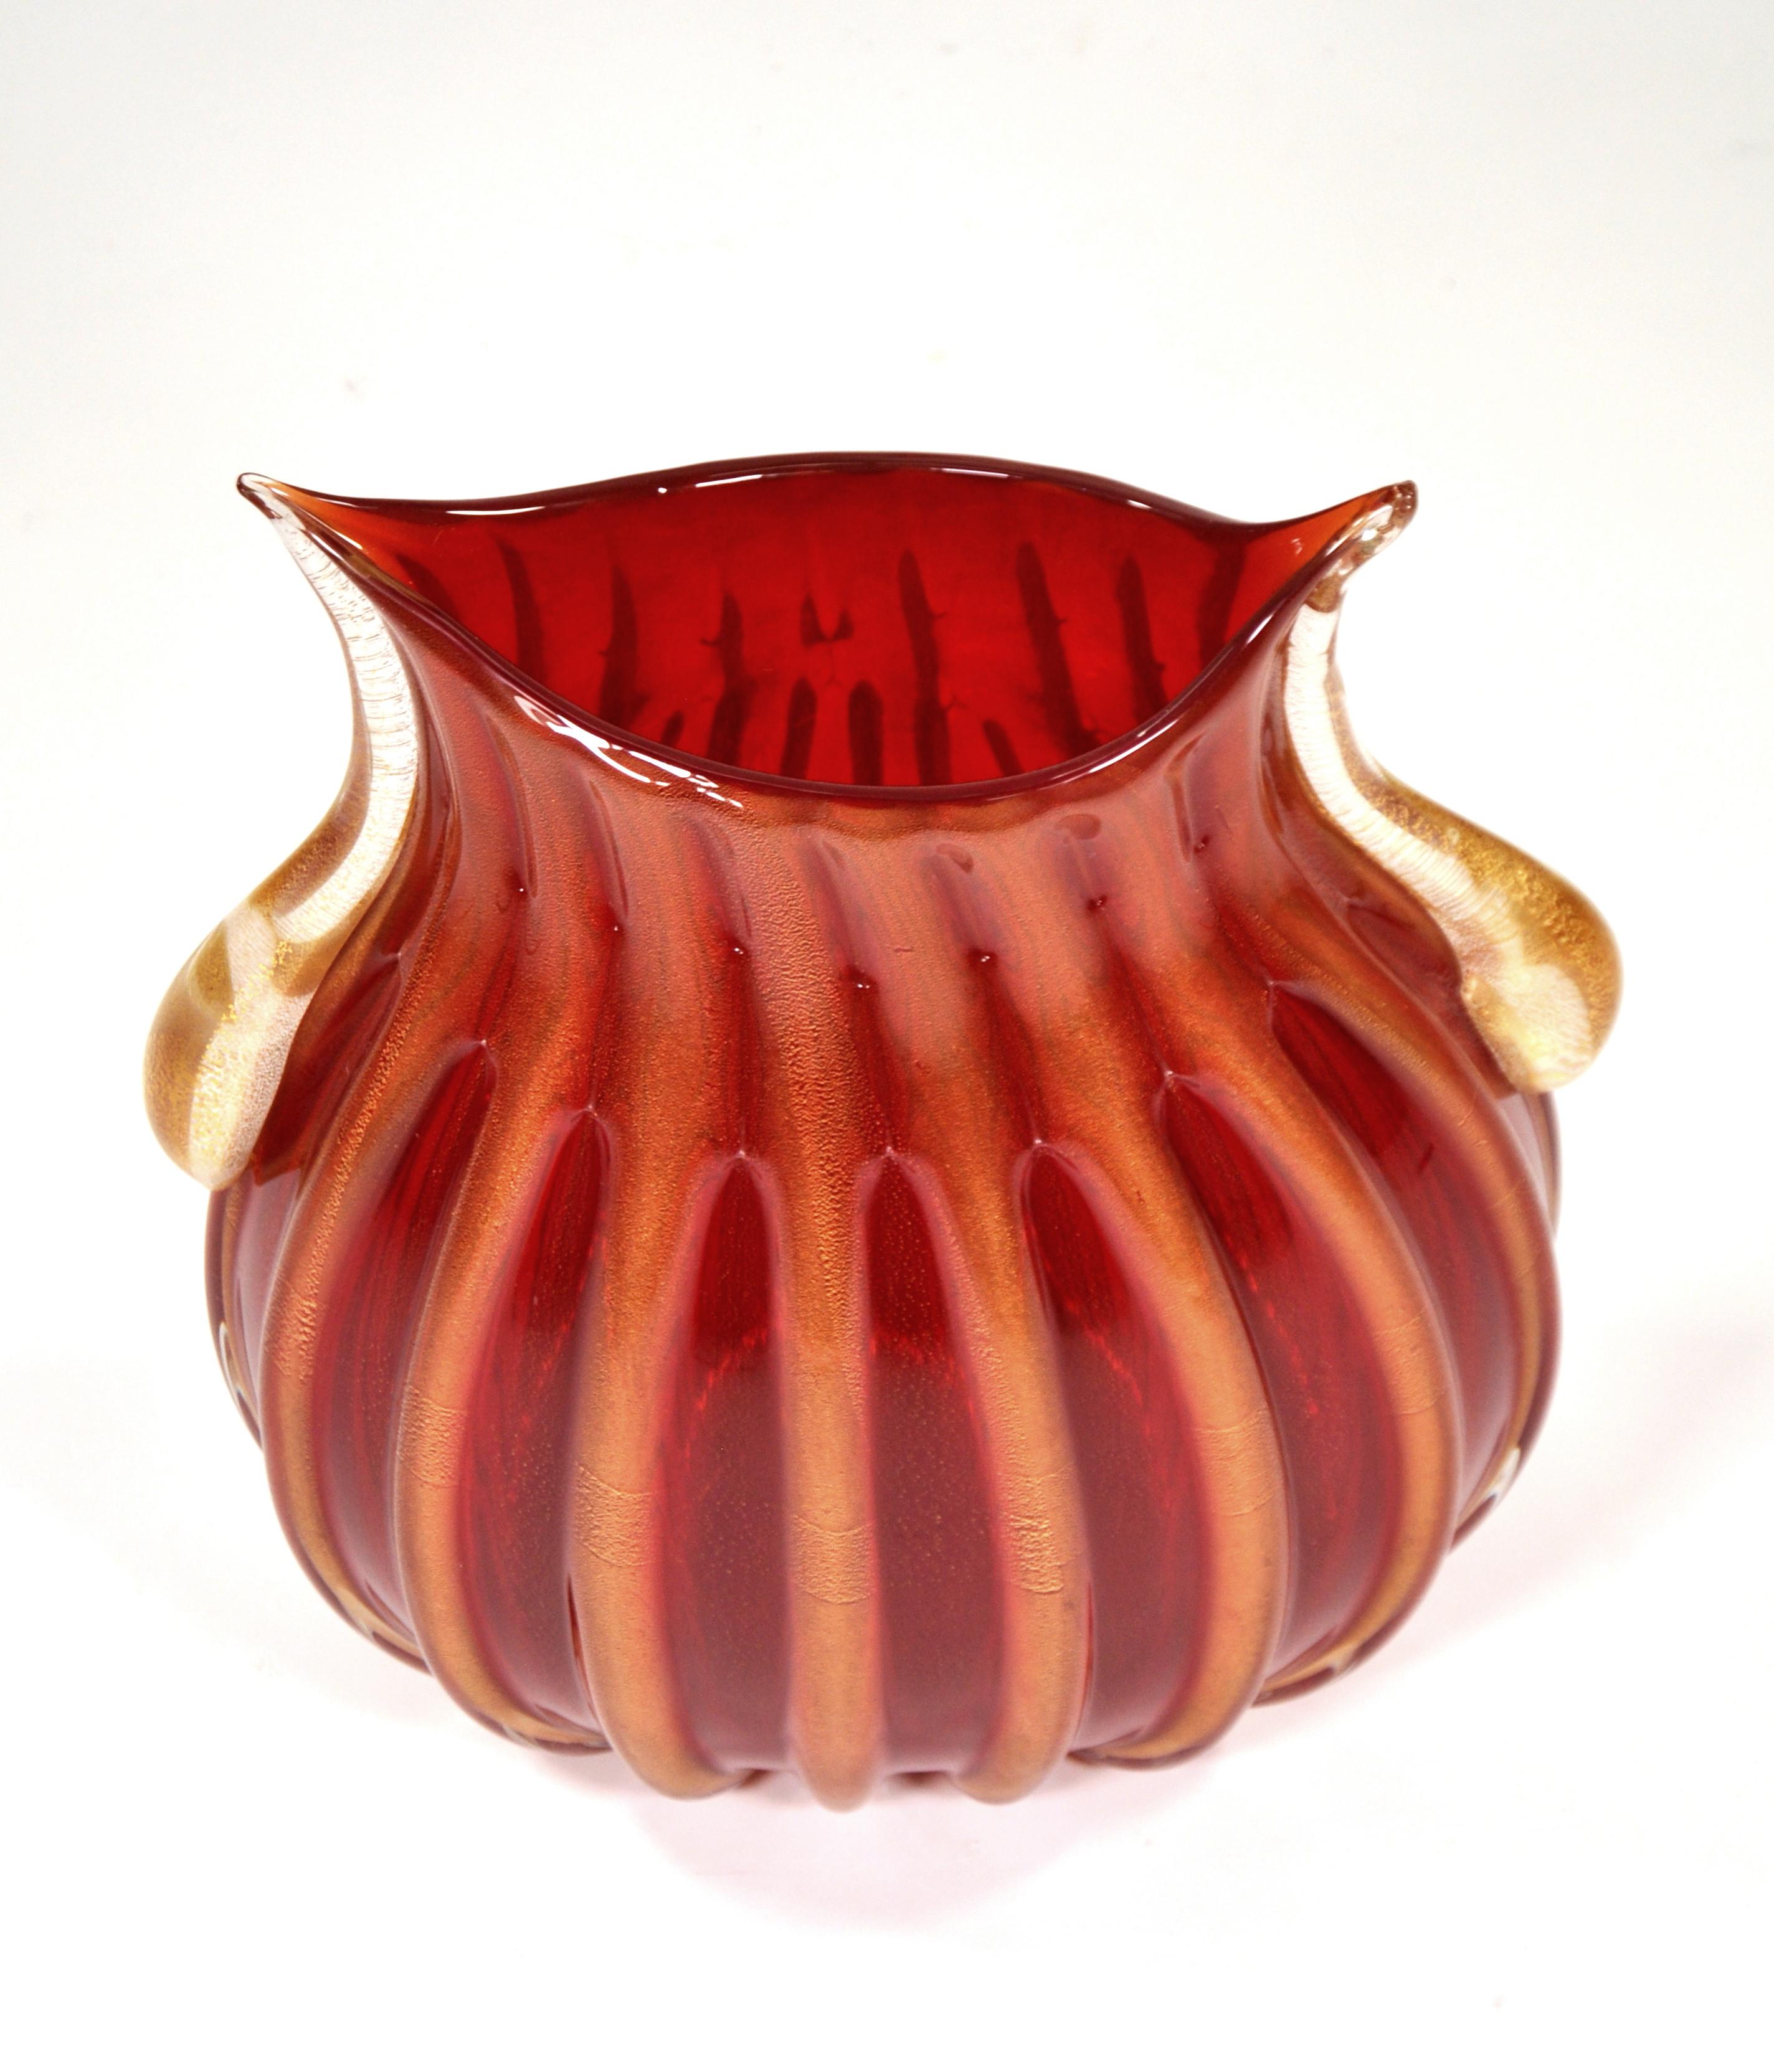 Signed Pair of Red and Gold Murano Glass Vases by Pino Signoretto For Sale 7